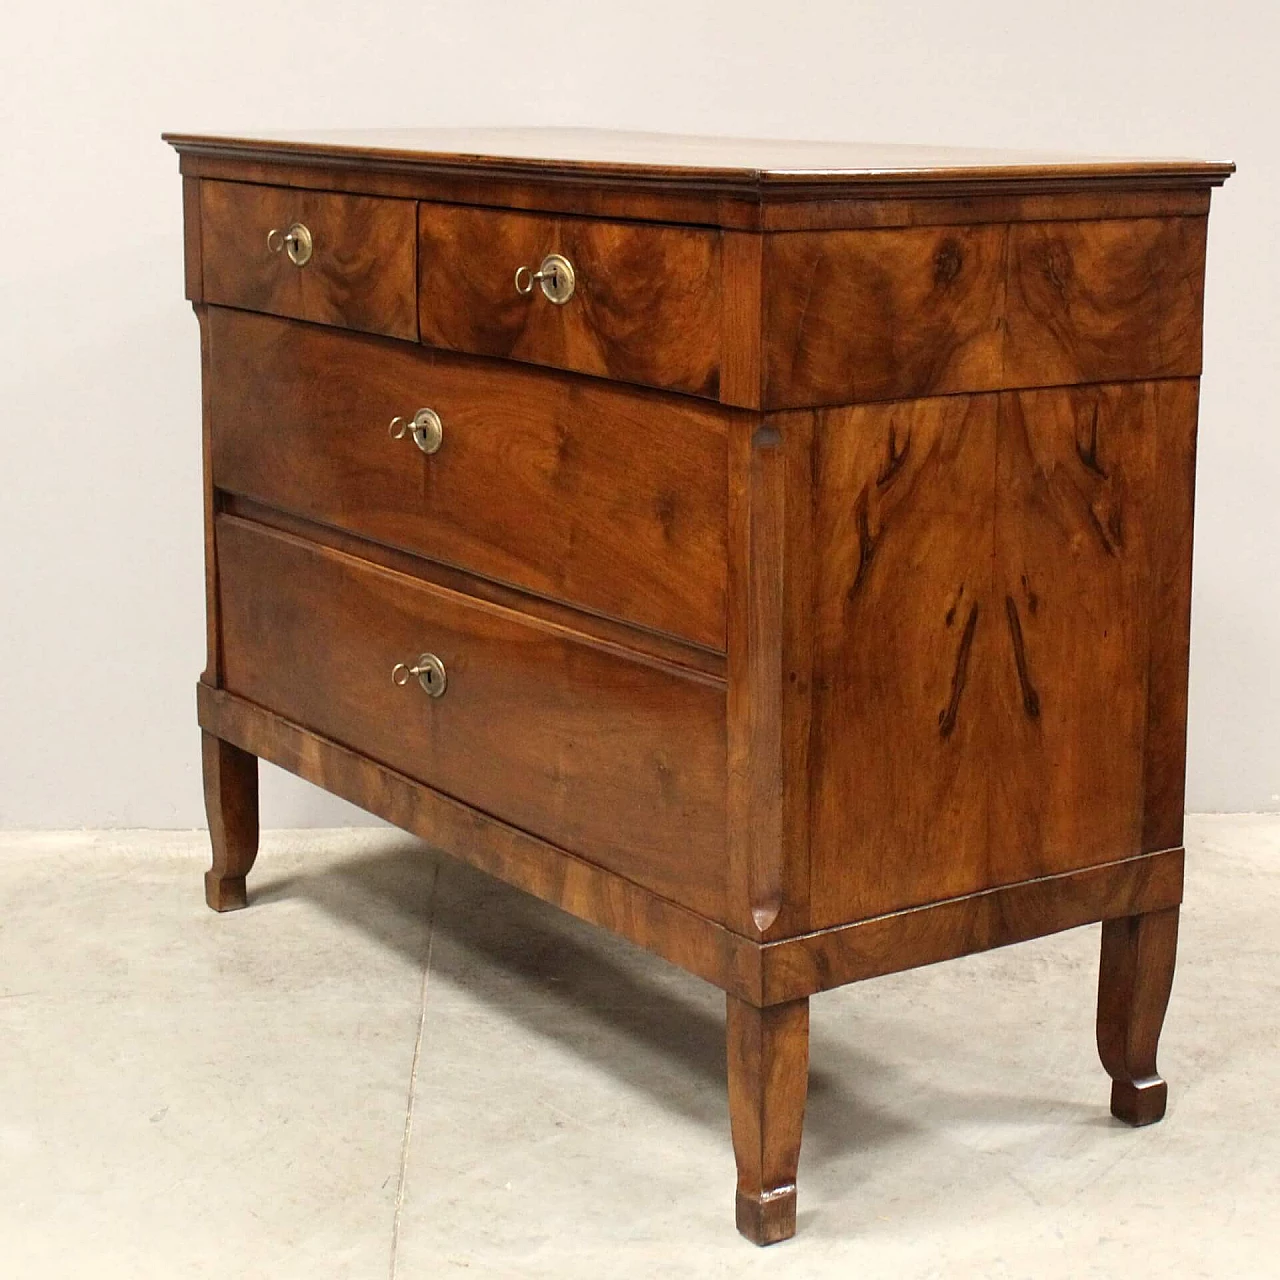 Direttorio chest of drawers in solid walnut and walnut panelling, second half of the 18th century 6